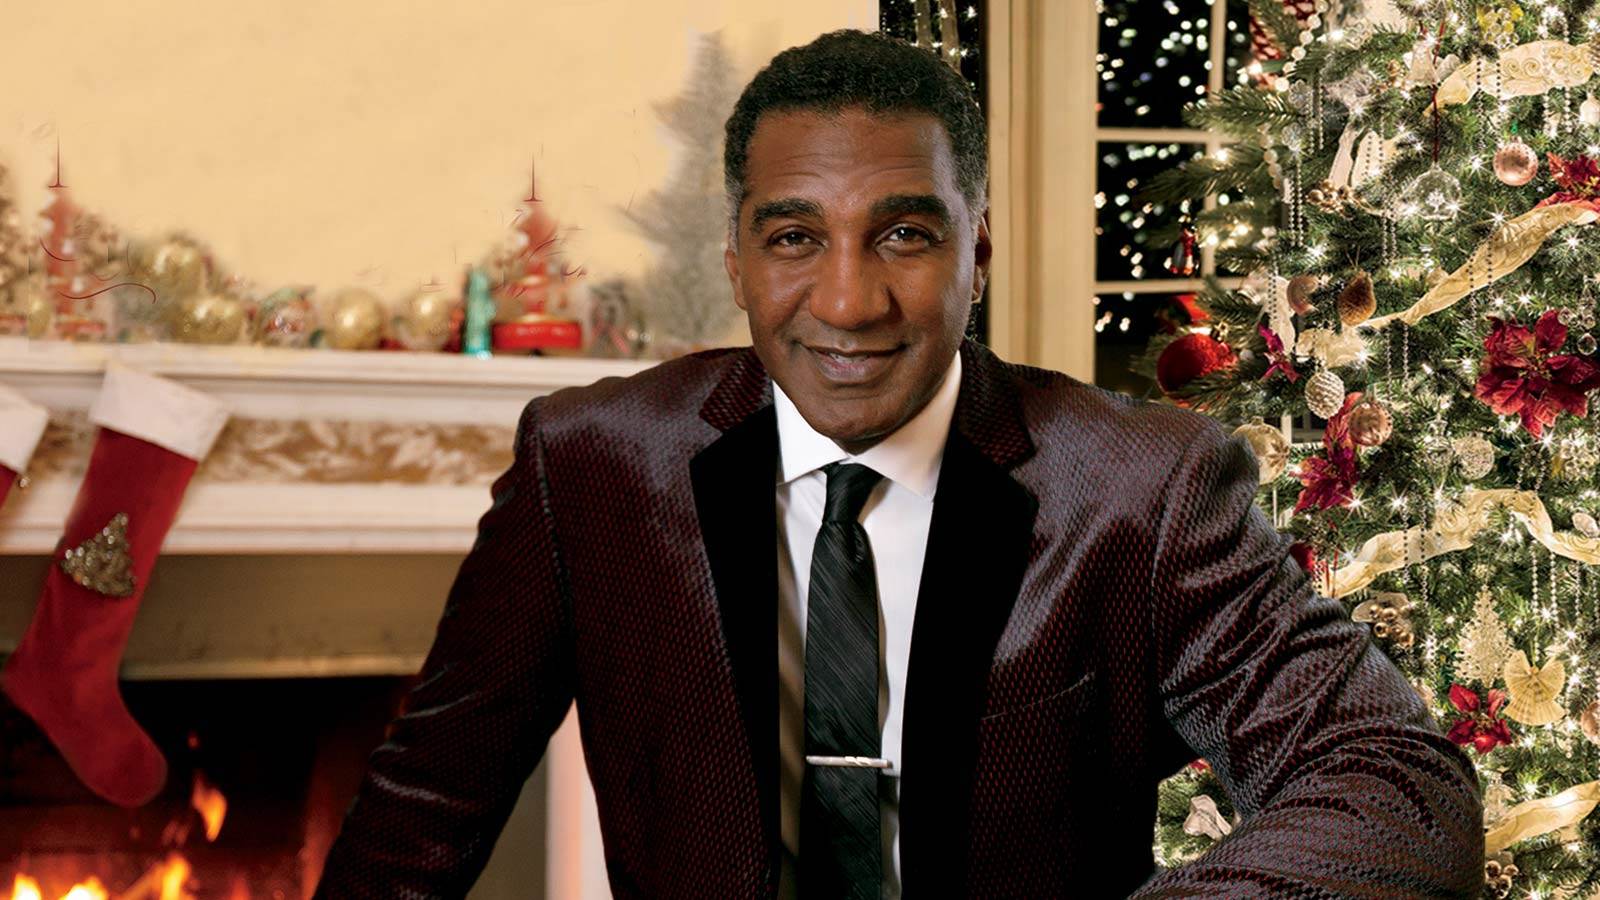 Norm Lewis in Christmas room with fireplace